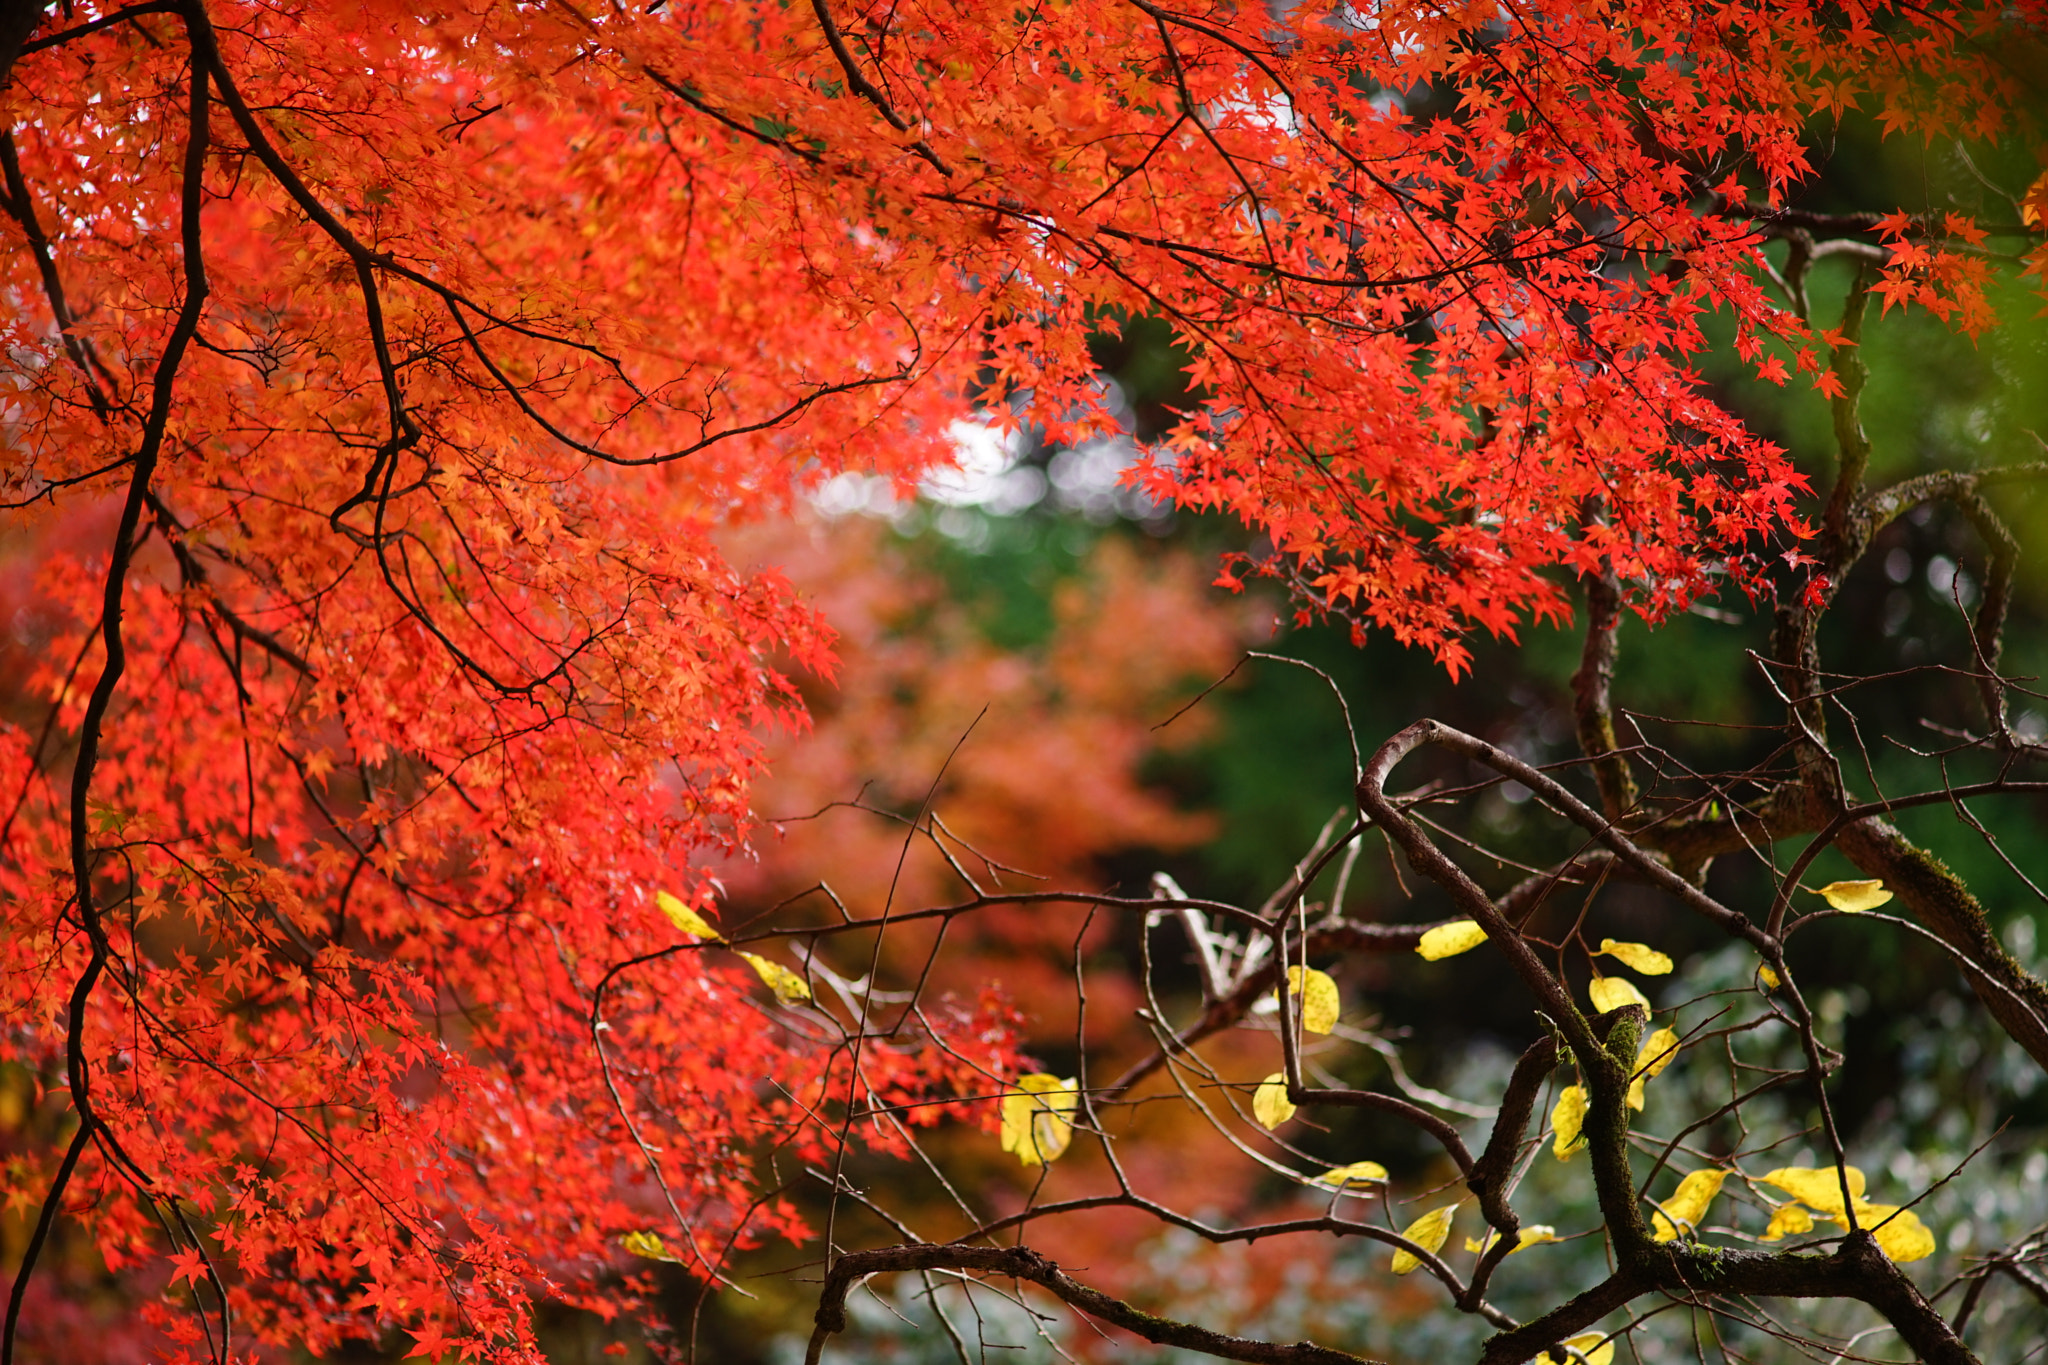 Sony a7 II sample photo. Yufuin's autumn leaves photography